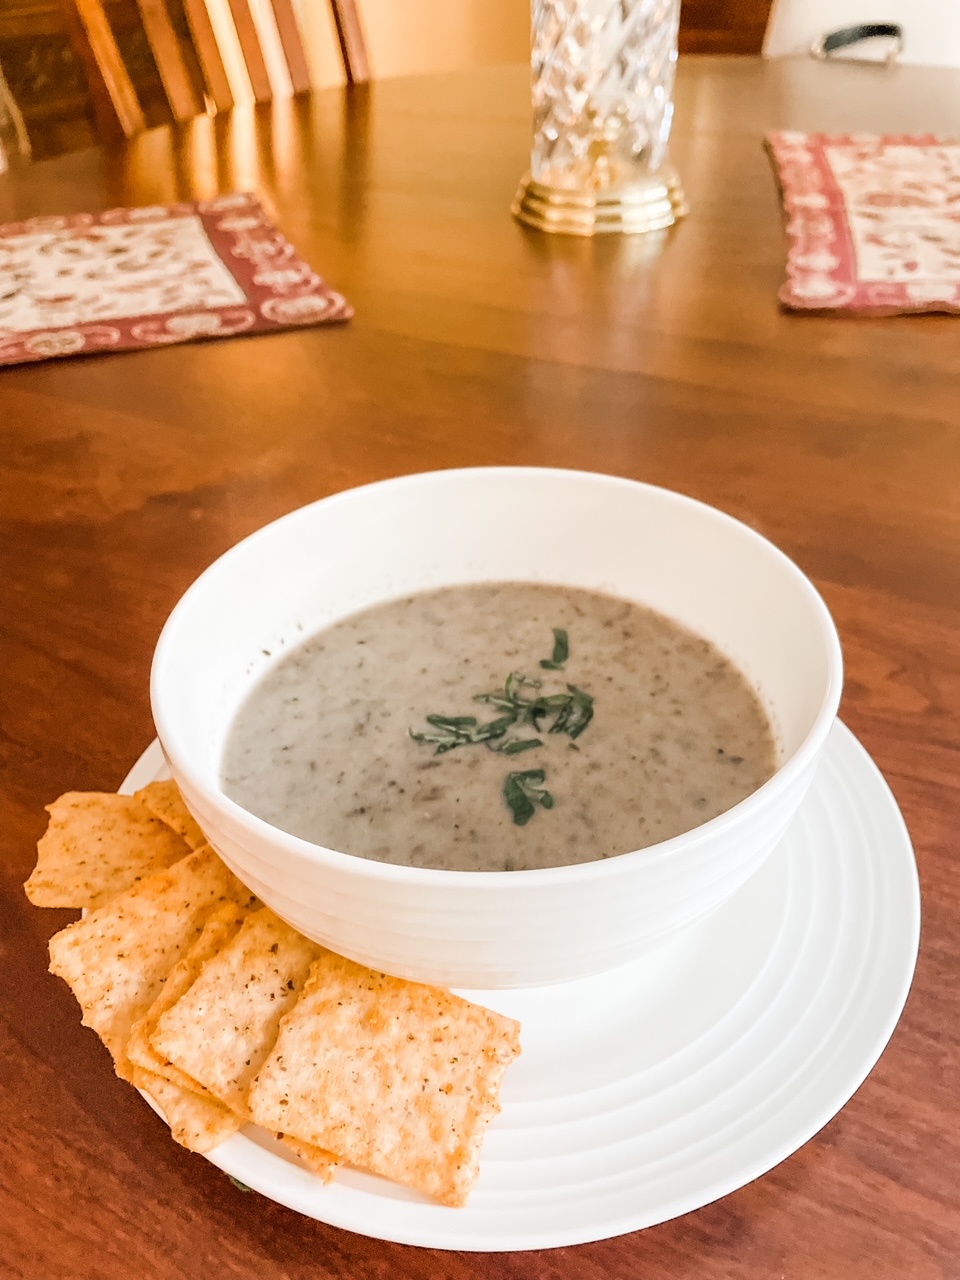 A bowl of the Creamy Garlic Mushroom Soup with crackers served alongside